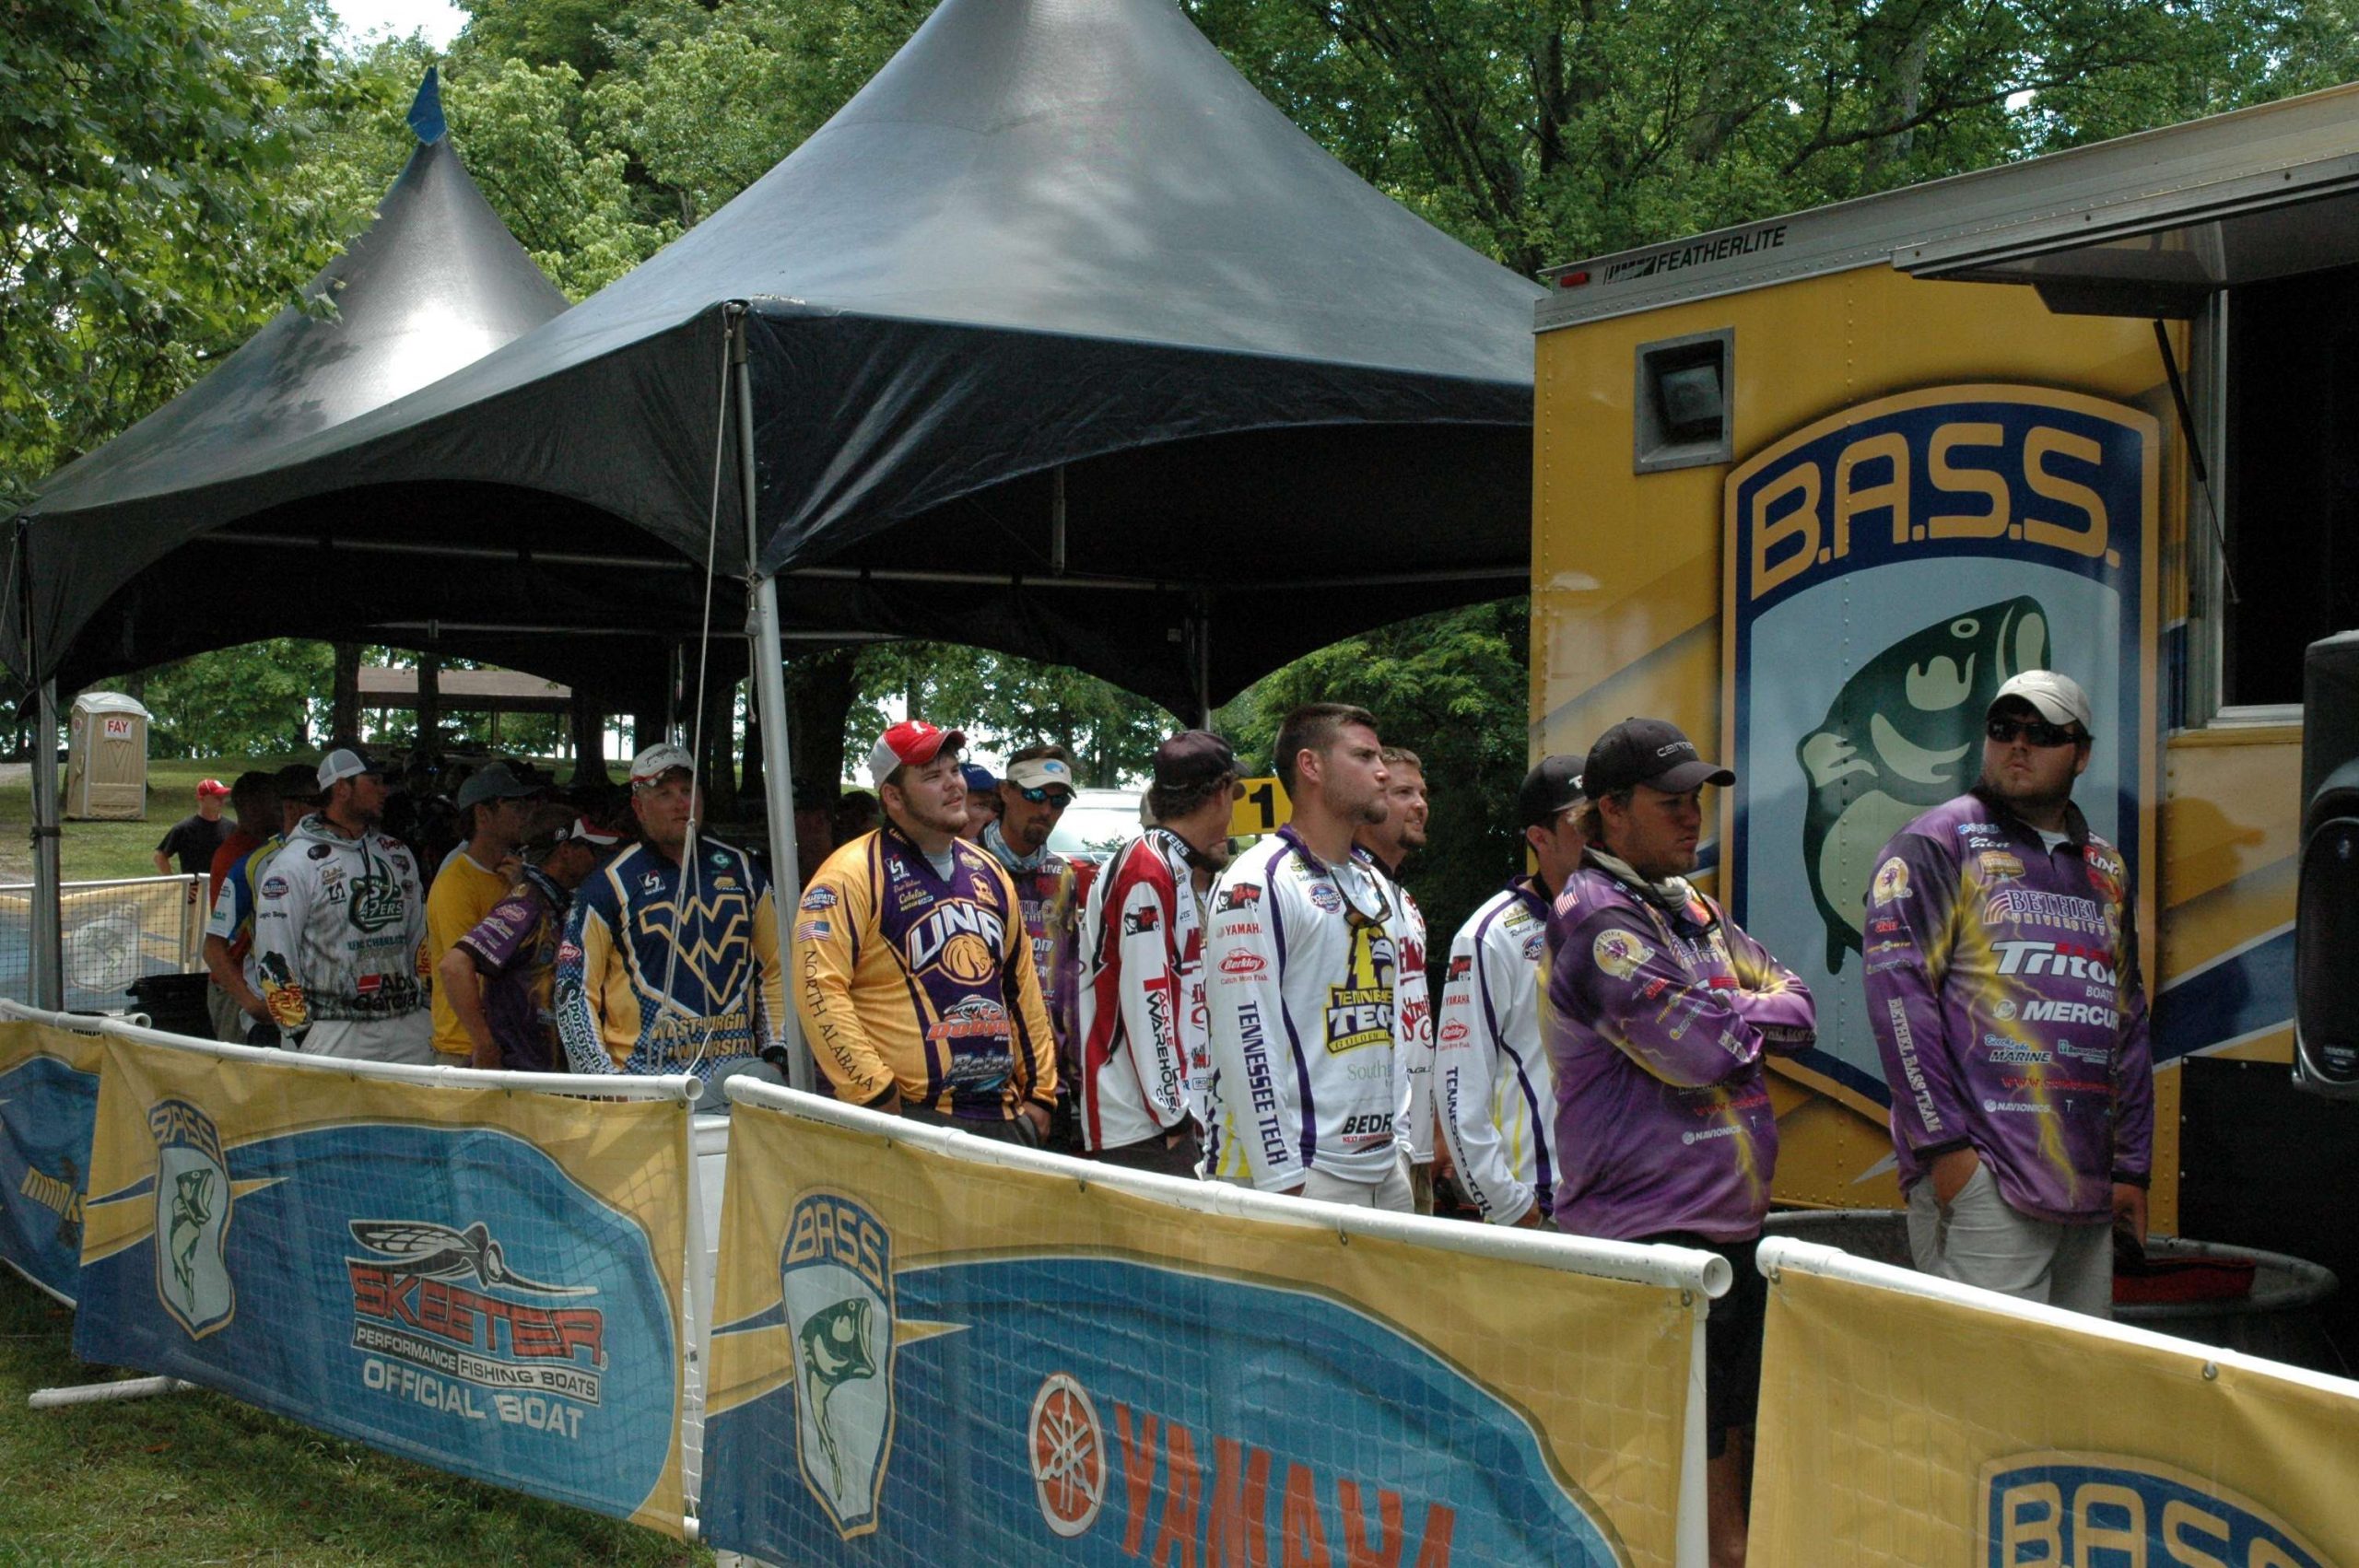 The final flight of anglers line up for the weigh-in scales. 